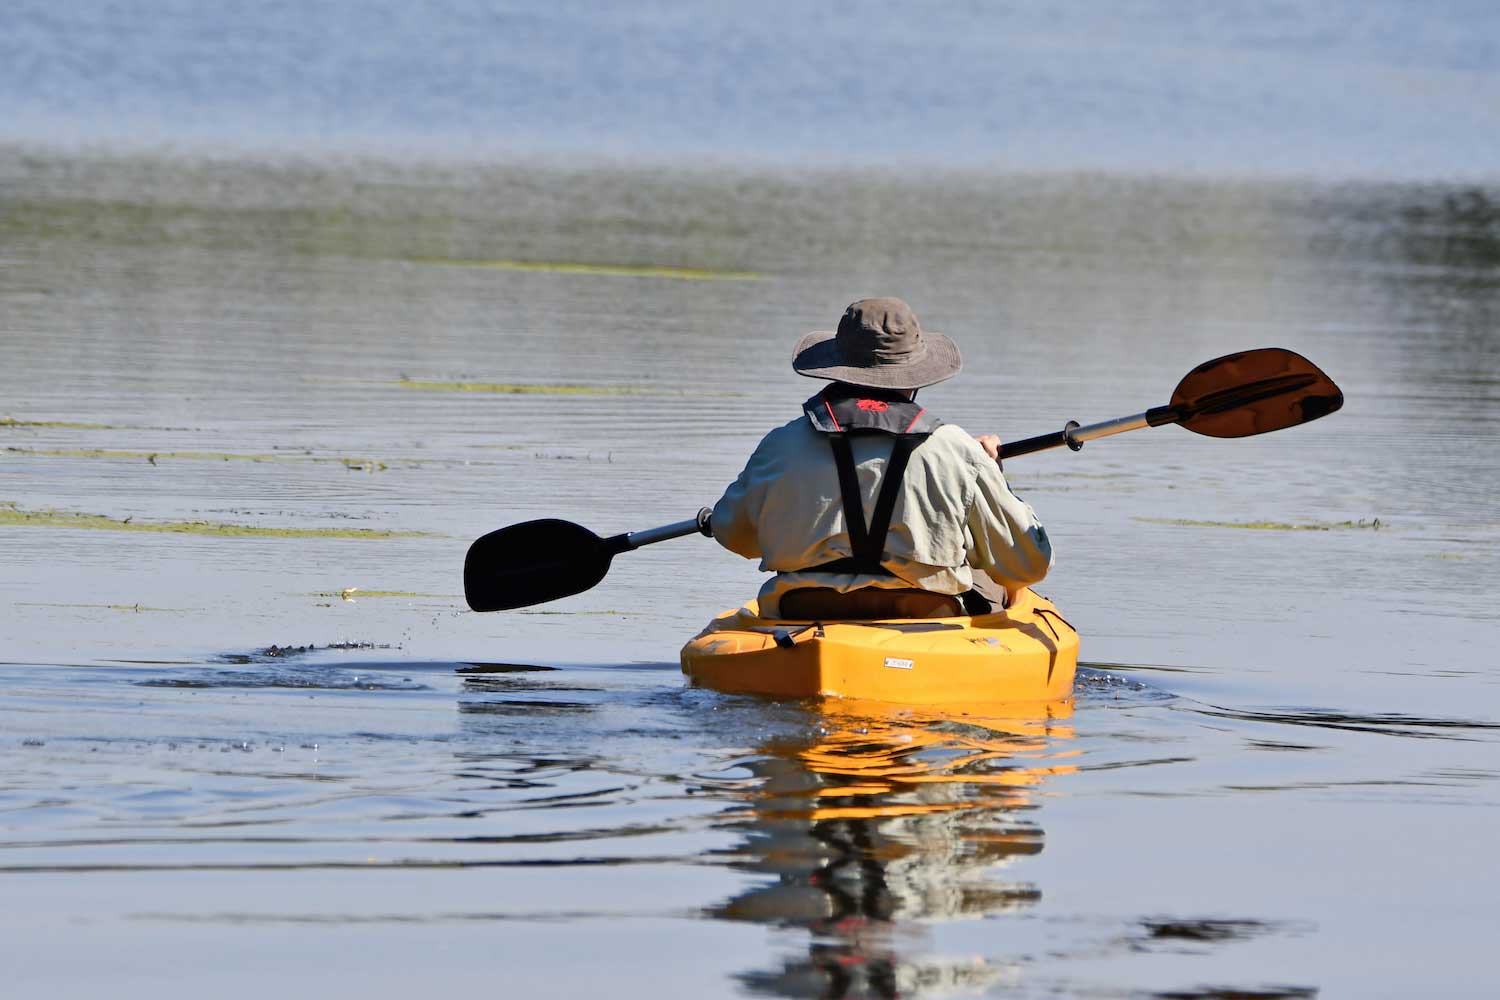 A person kayaking as seen from behind.